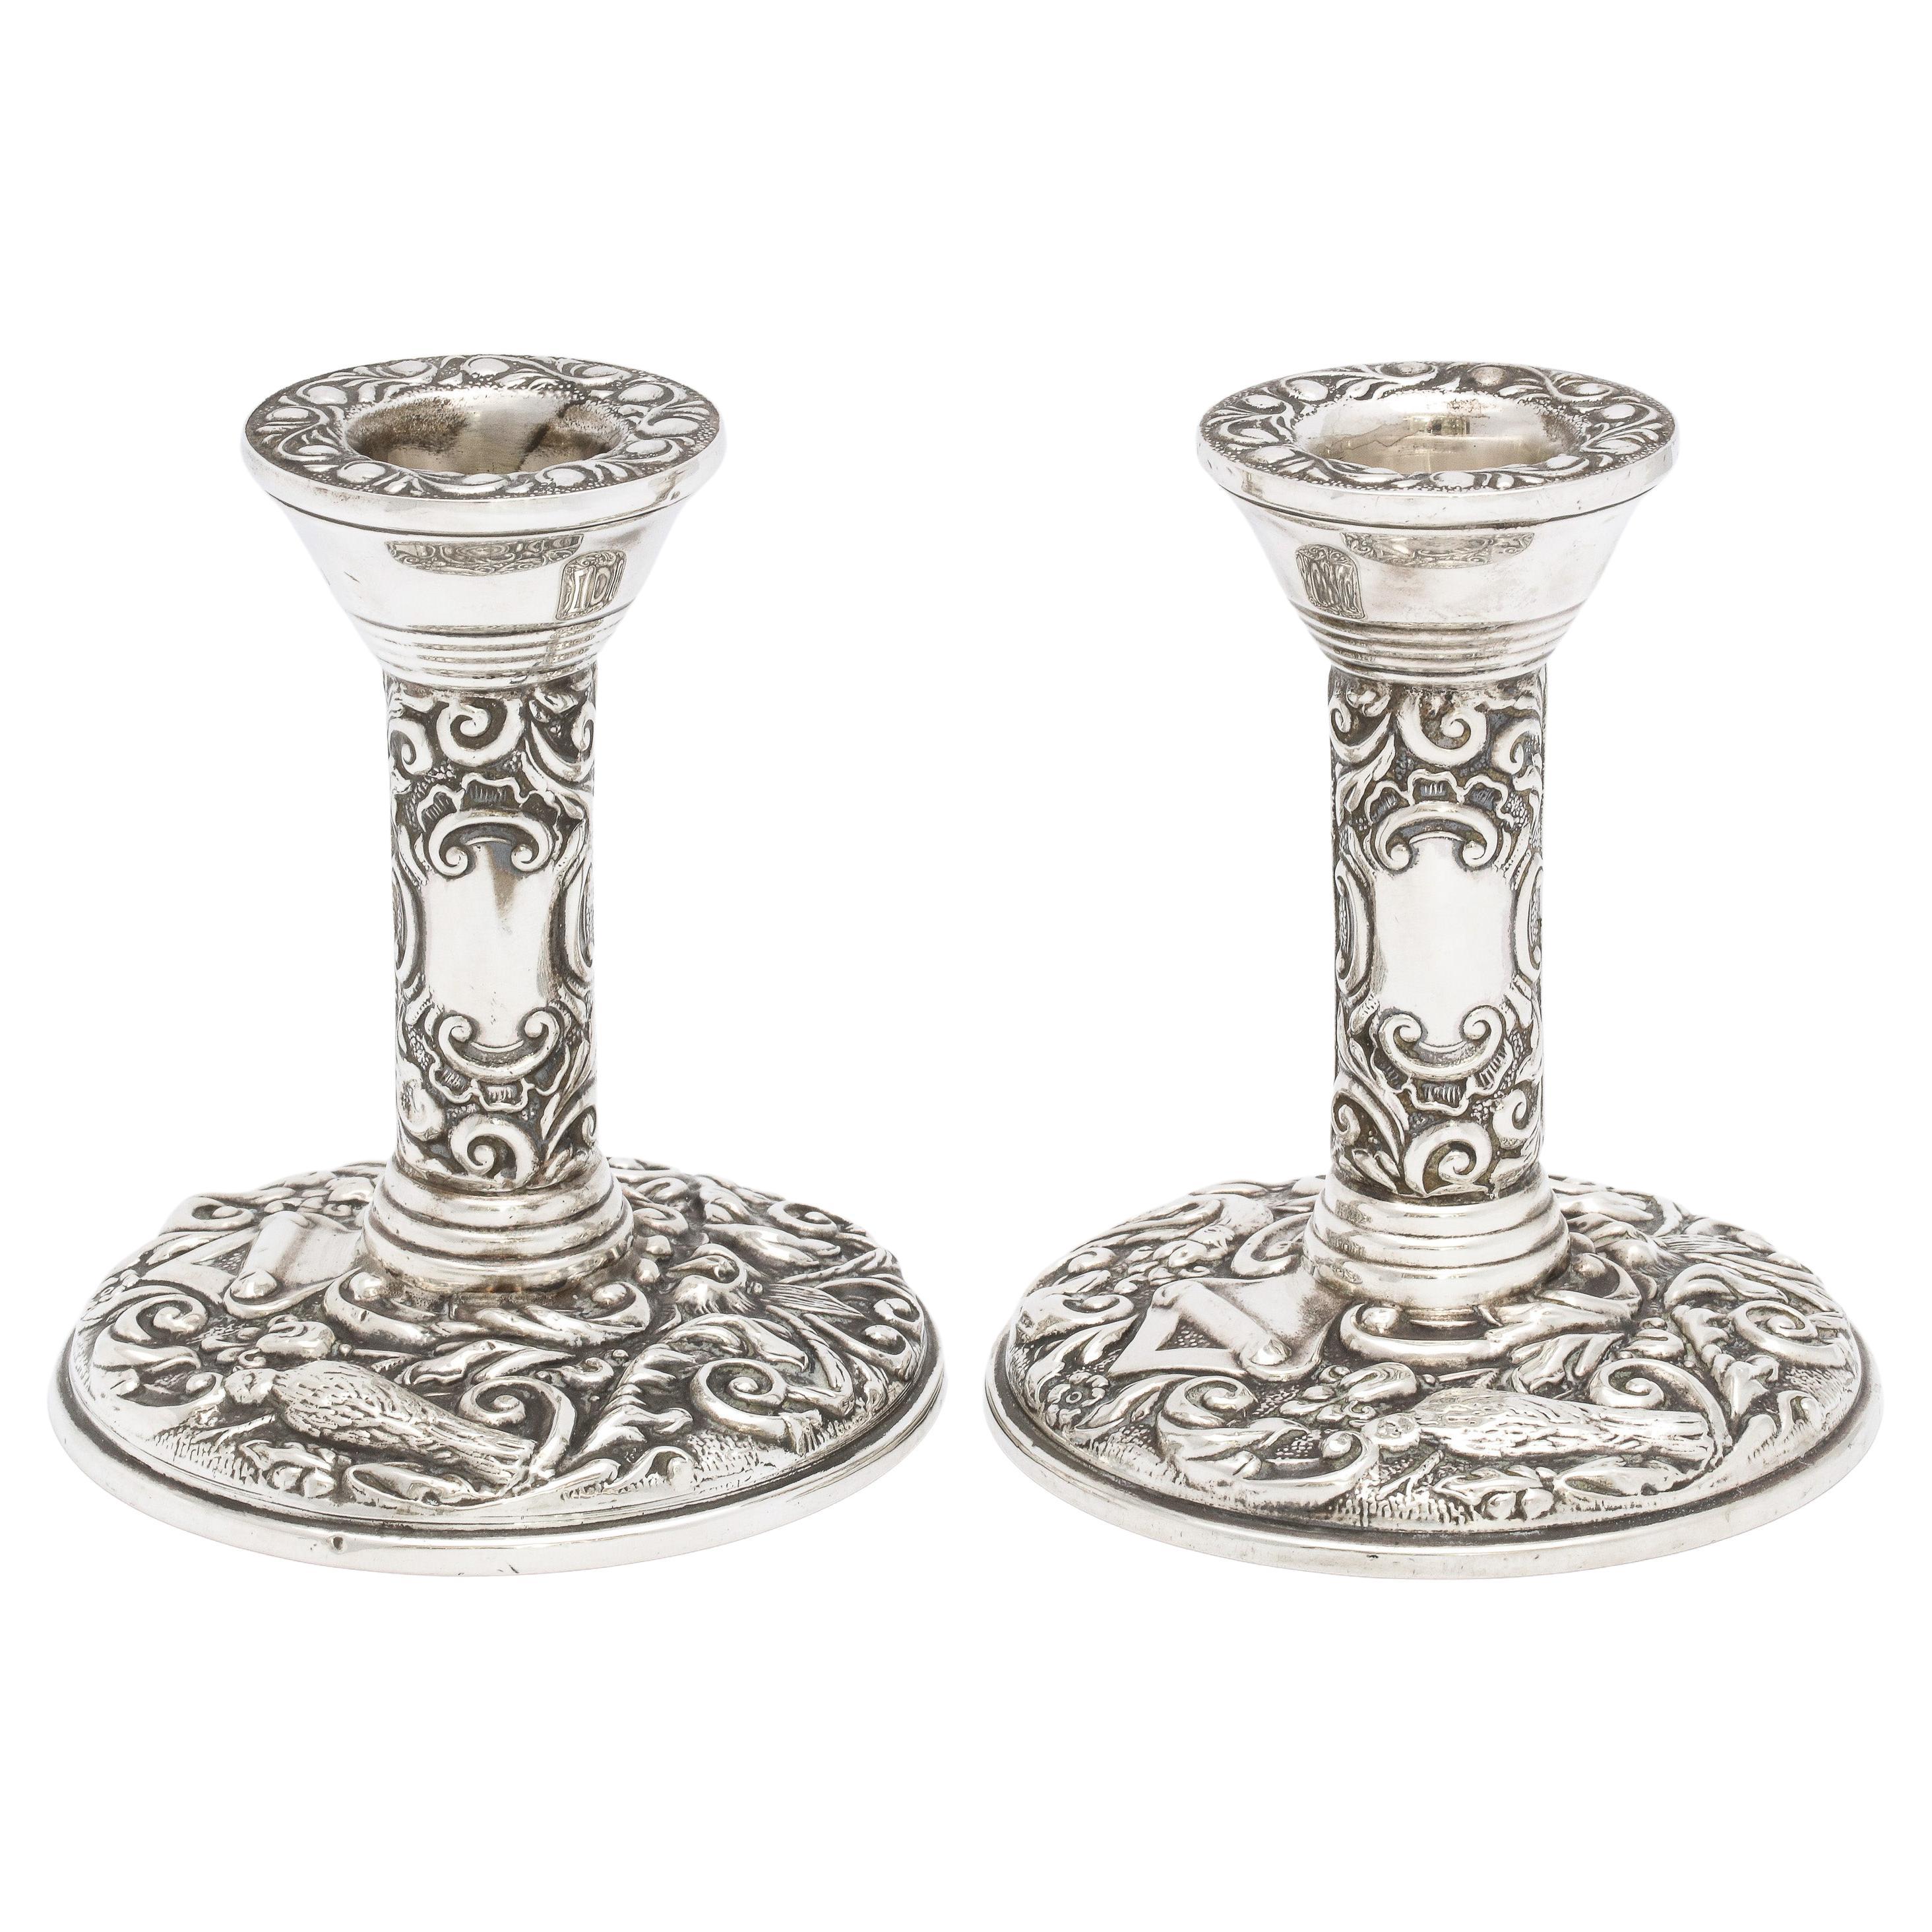 Pair of Victorian Style Sterling Silver Candlesticks